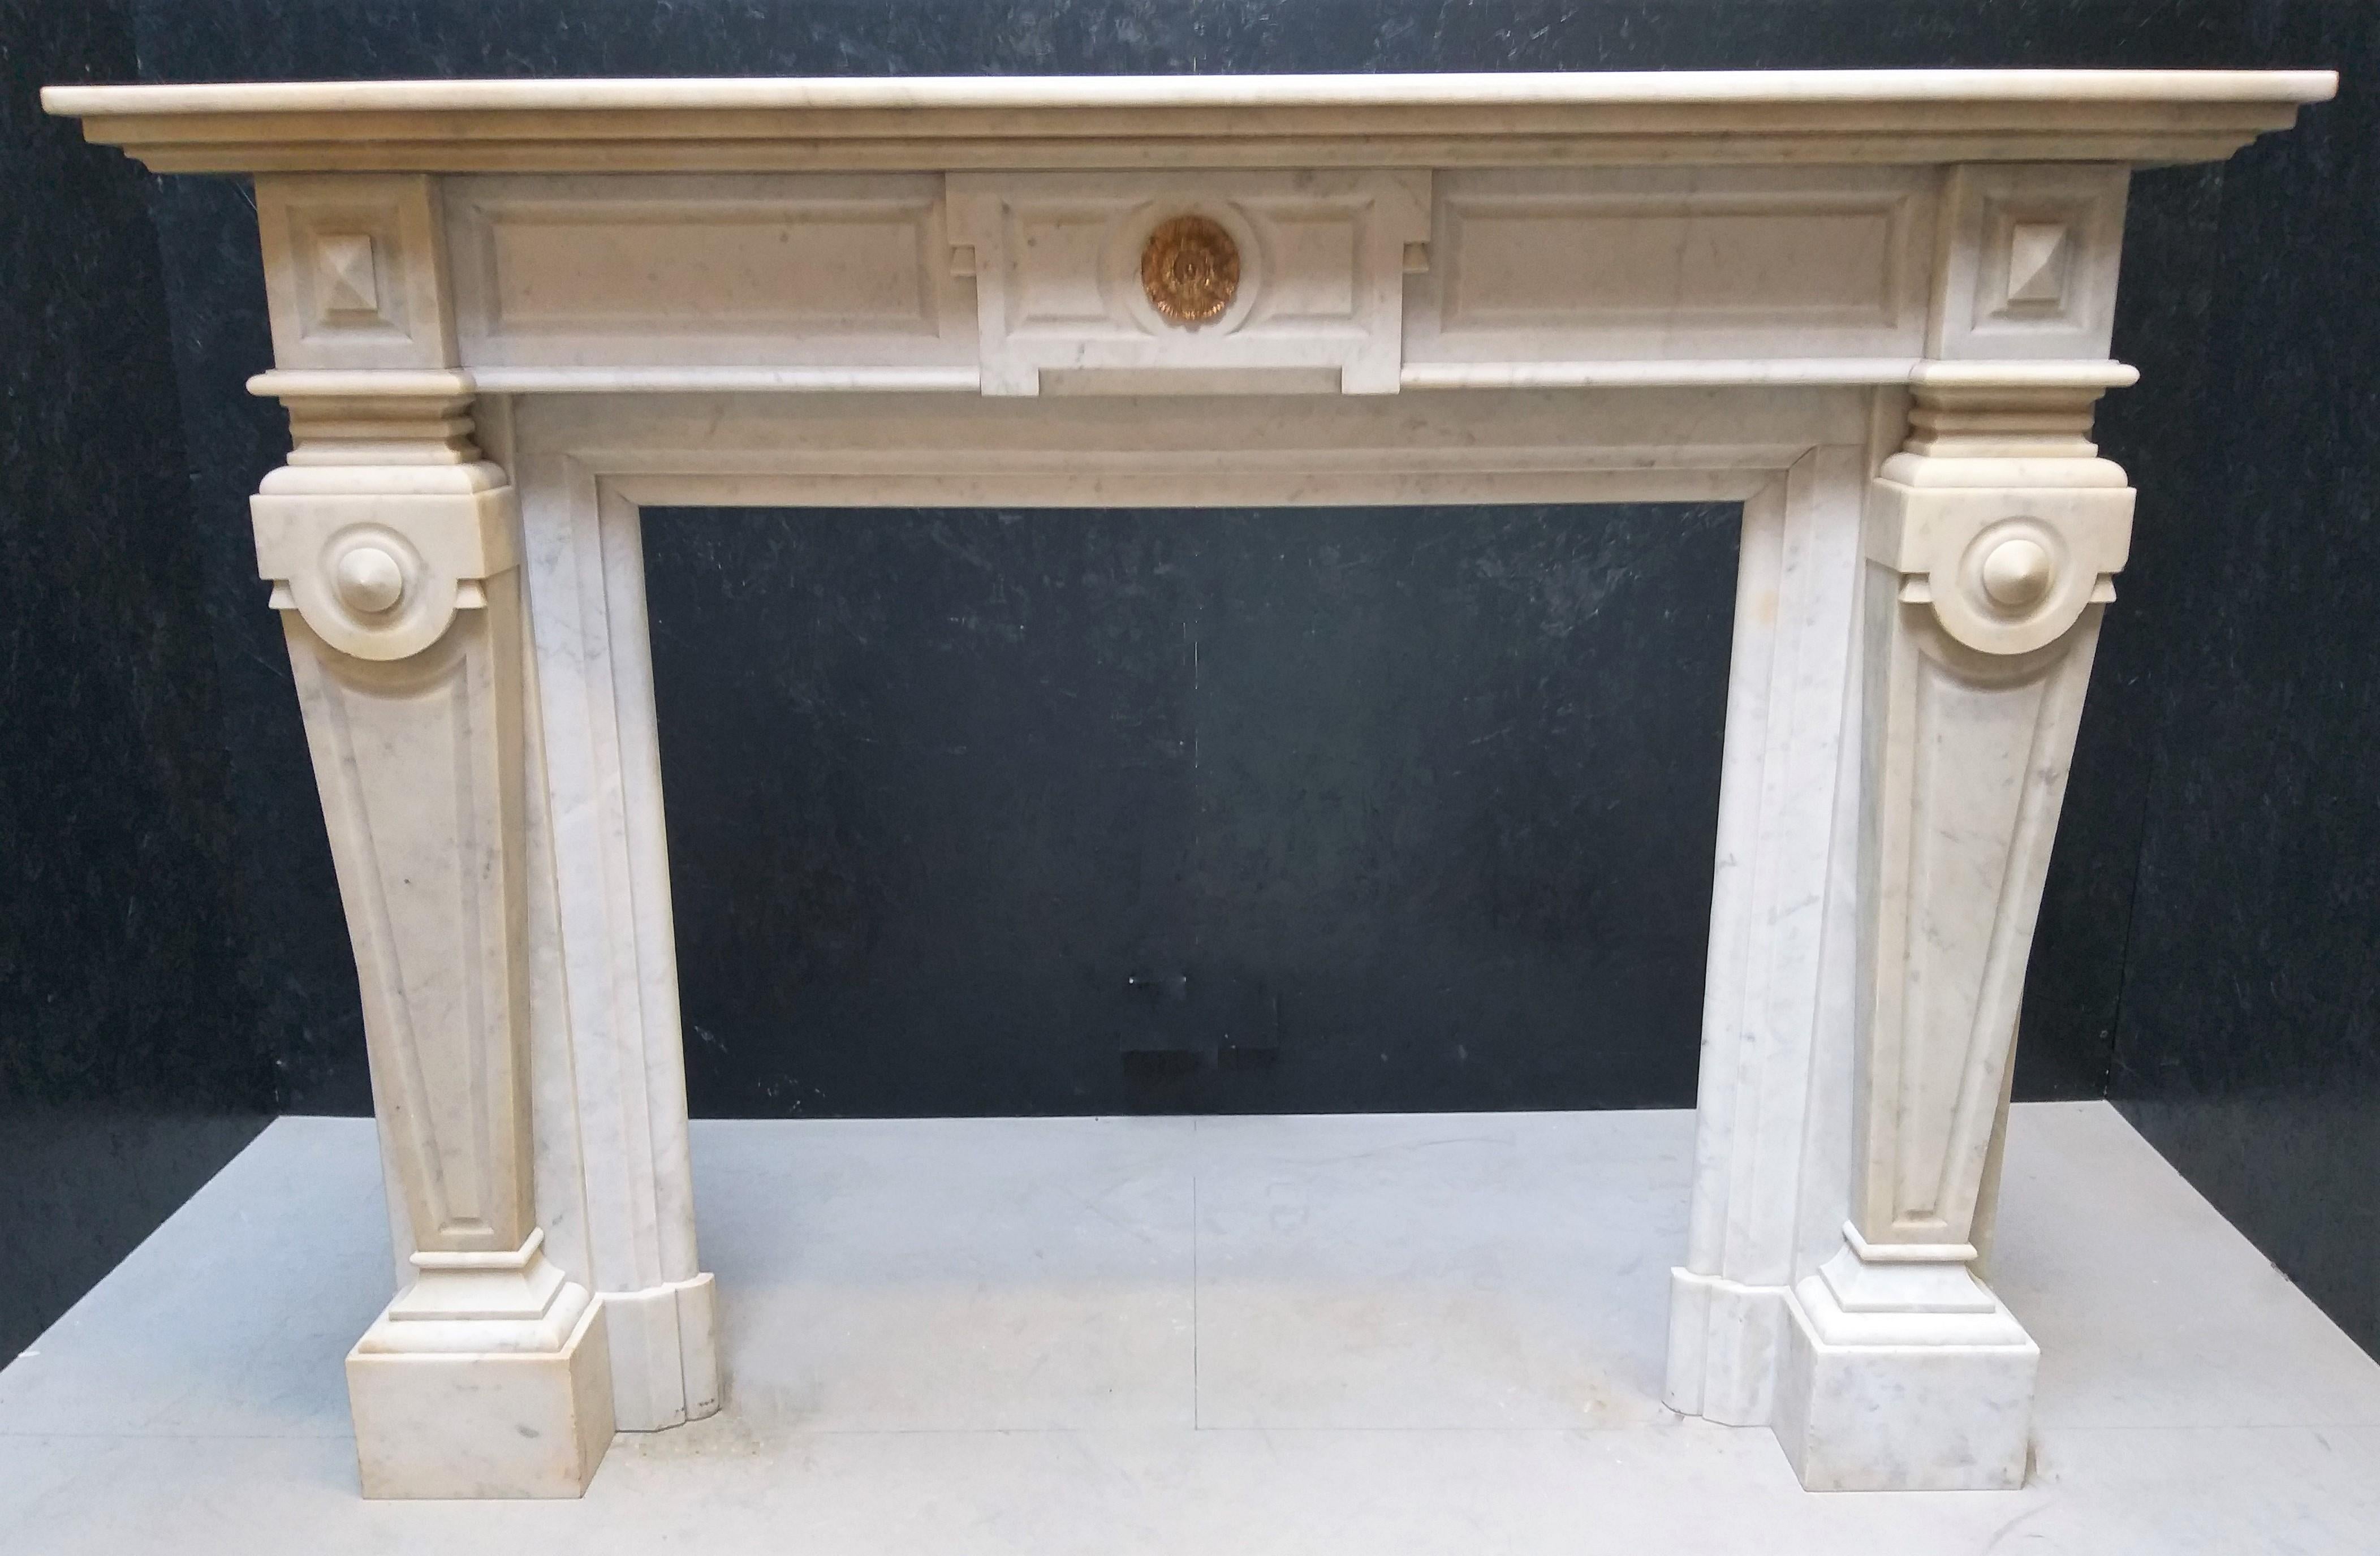 This Napoléon III marble fireplace is made out of demi-statuary Carrara marble, during the late 19th century. It has a little bronze rosette in the center of the frieze and has pilaster-shaped jambs. The Napoléon III style is highly eclectic